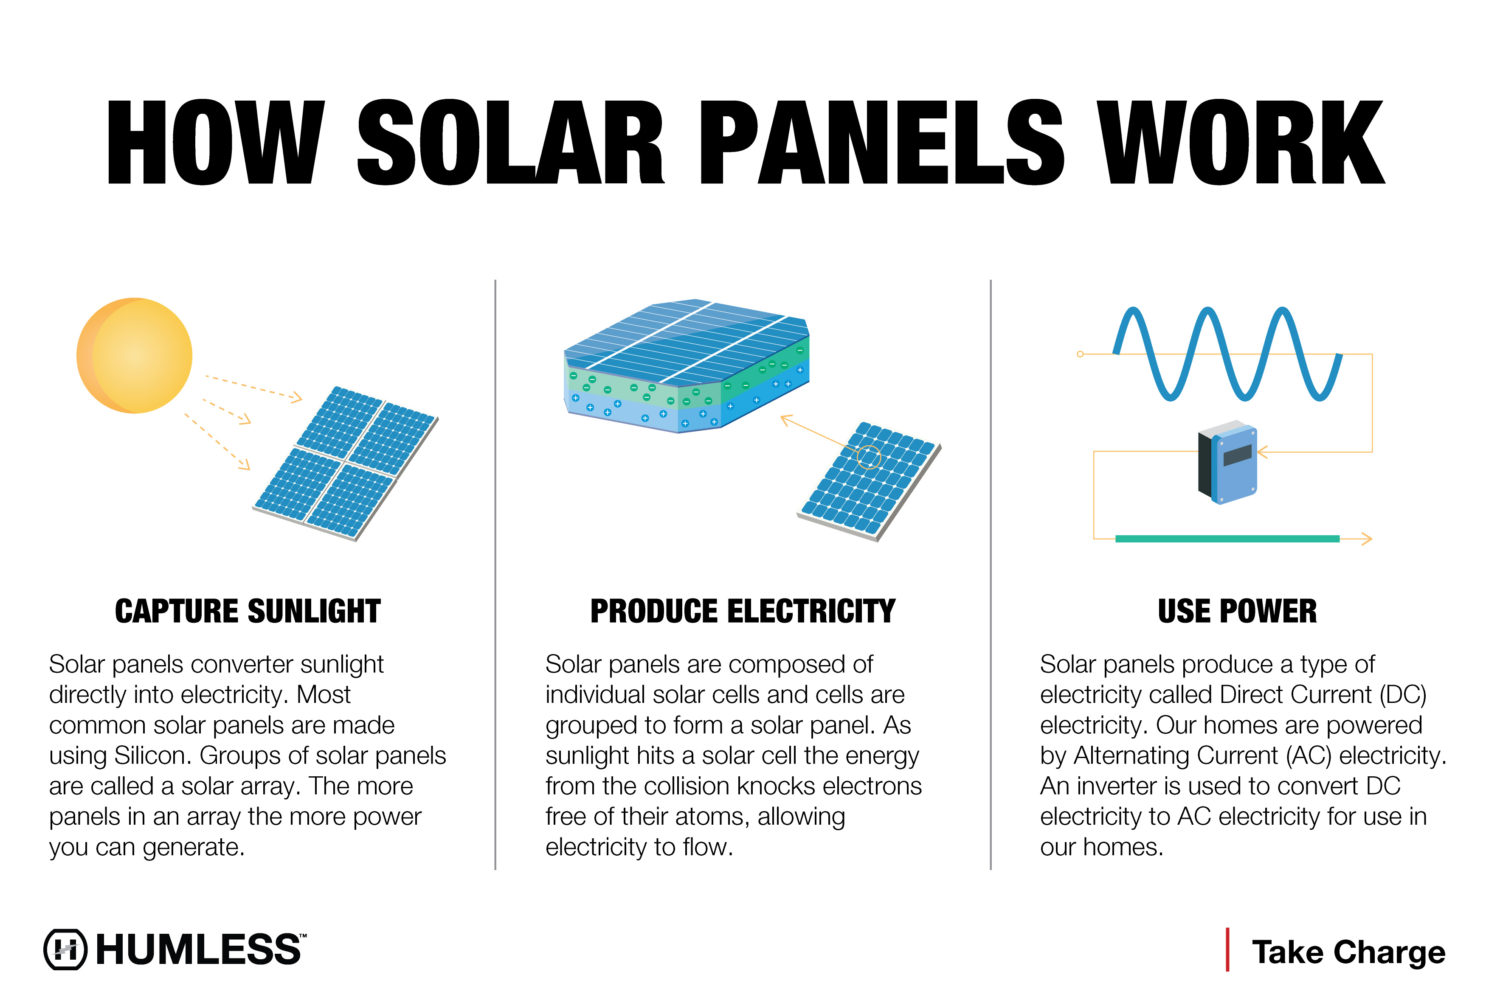 You Can Make Your Own Solar Panels, and It's Easier Than You'd Think